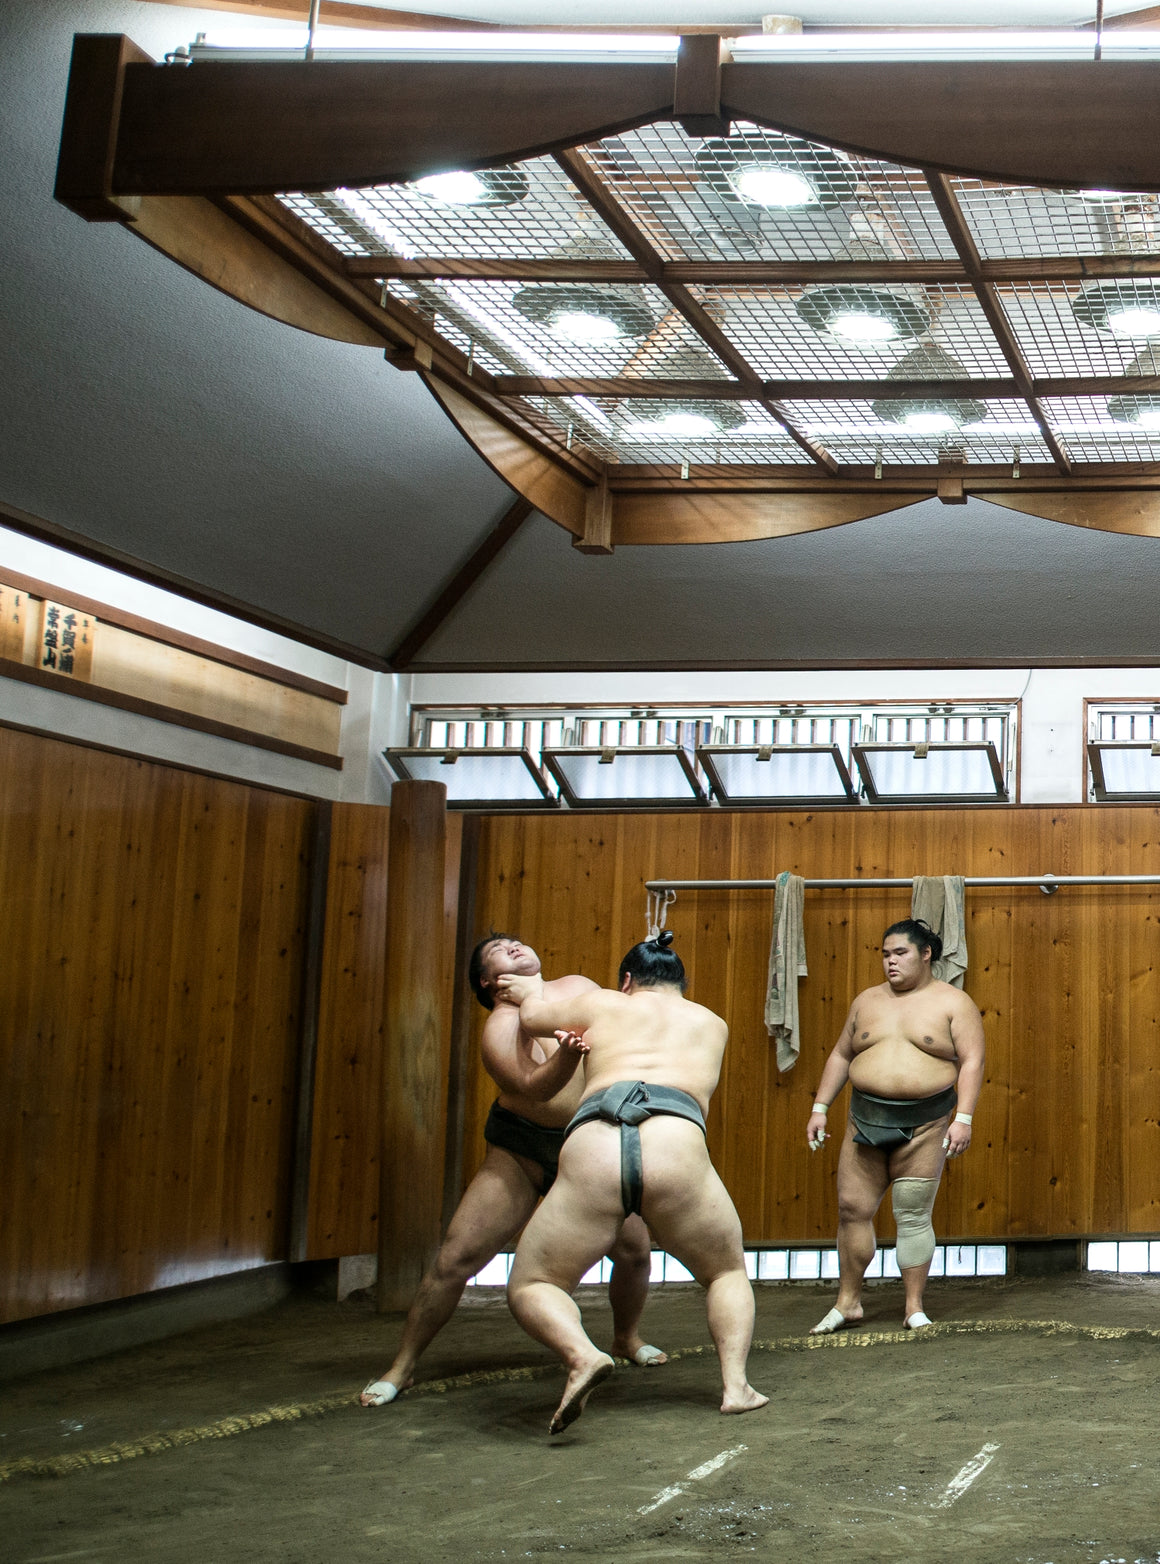 Sumo wrestlers training in their stables